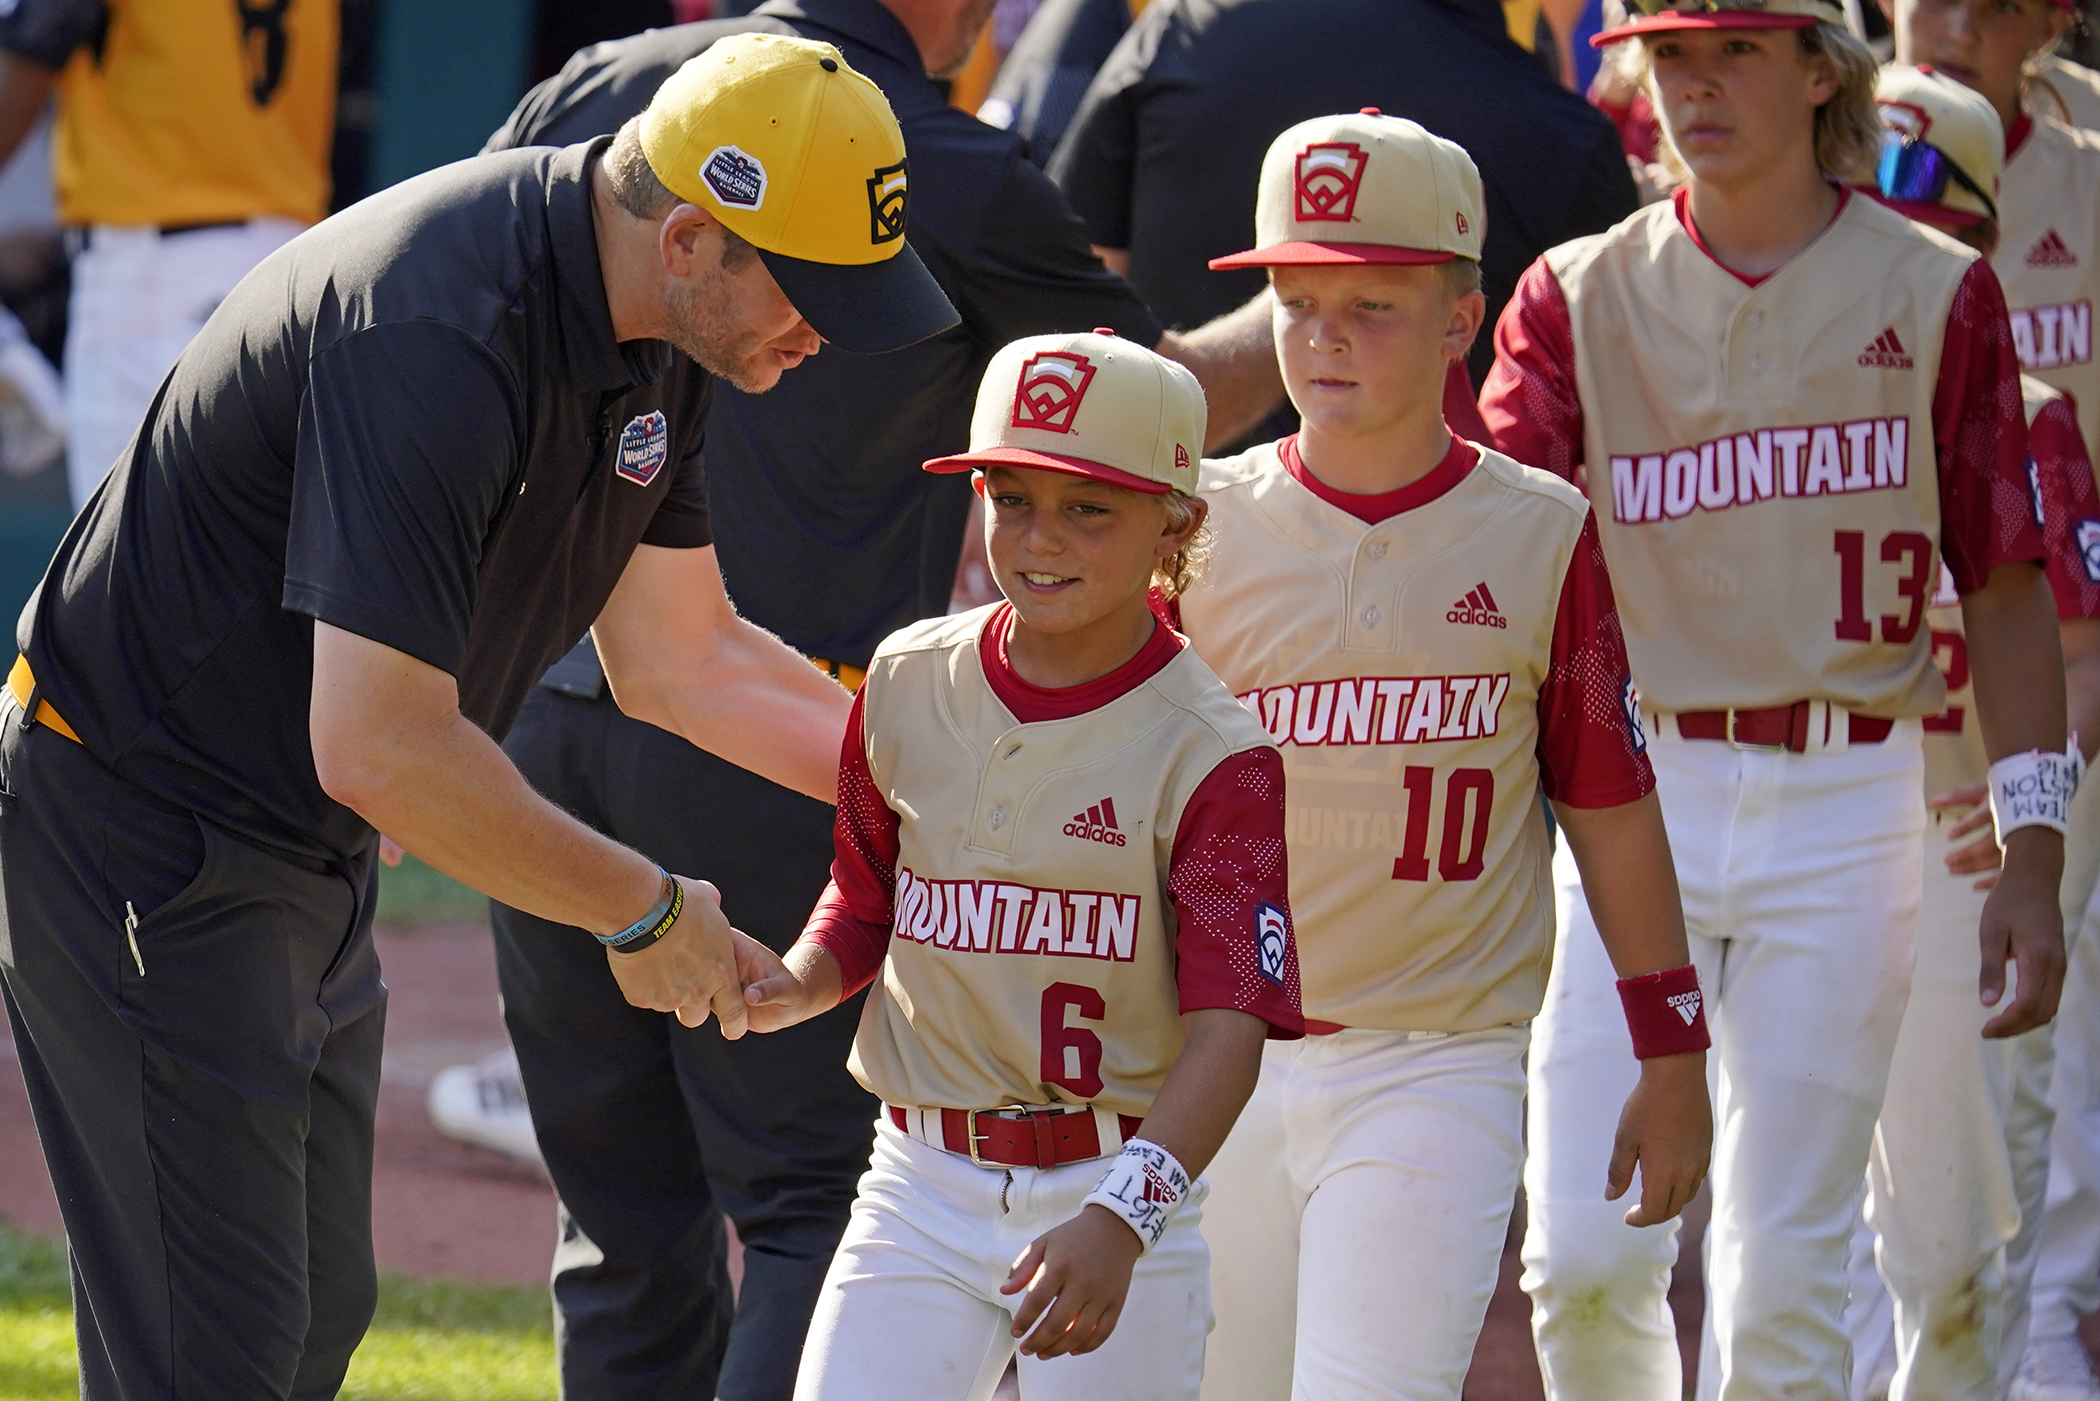 Little League World Series 2022: See plays from Nolensville opener win